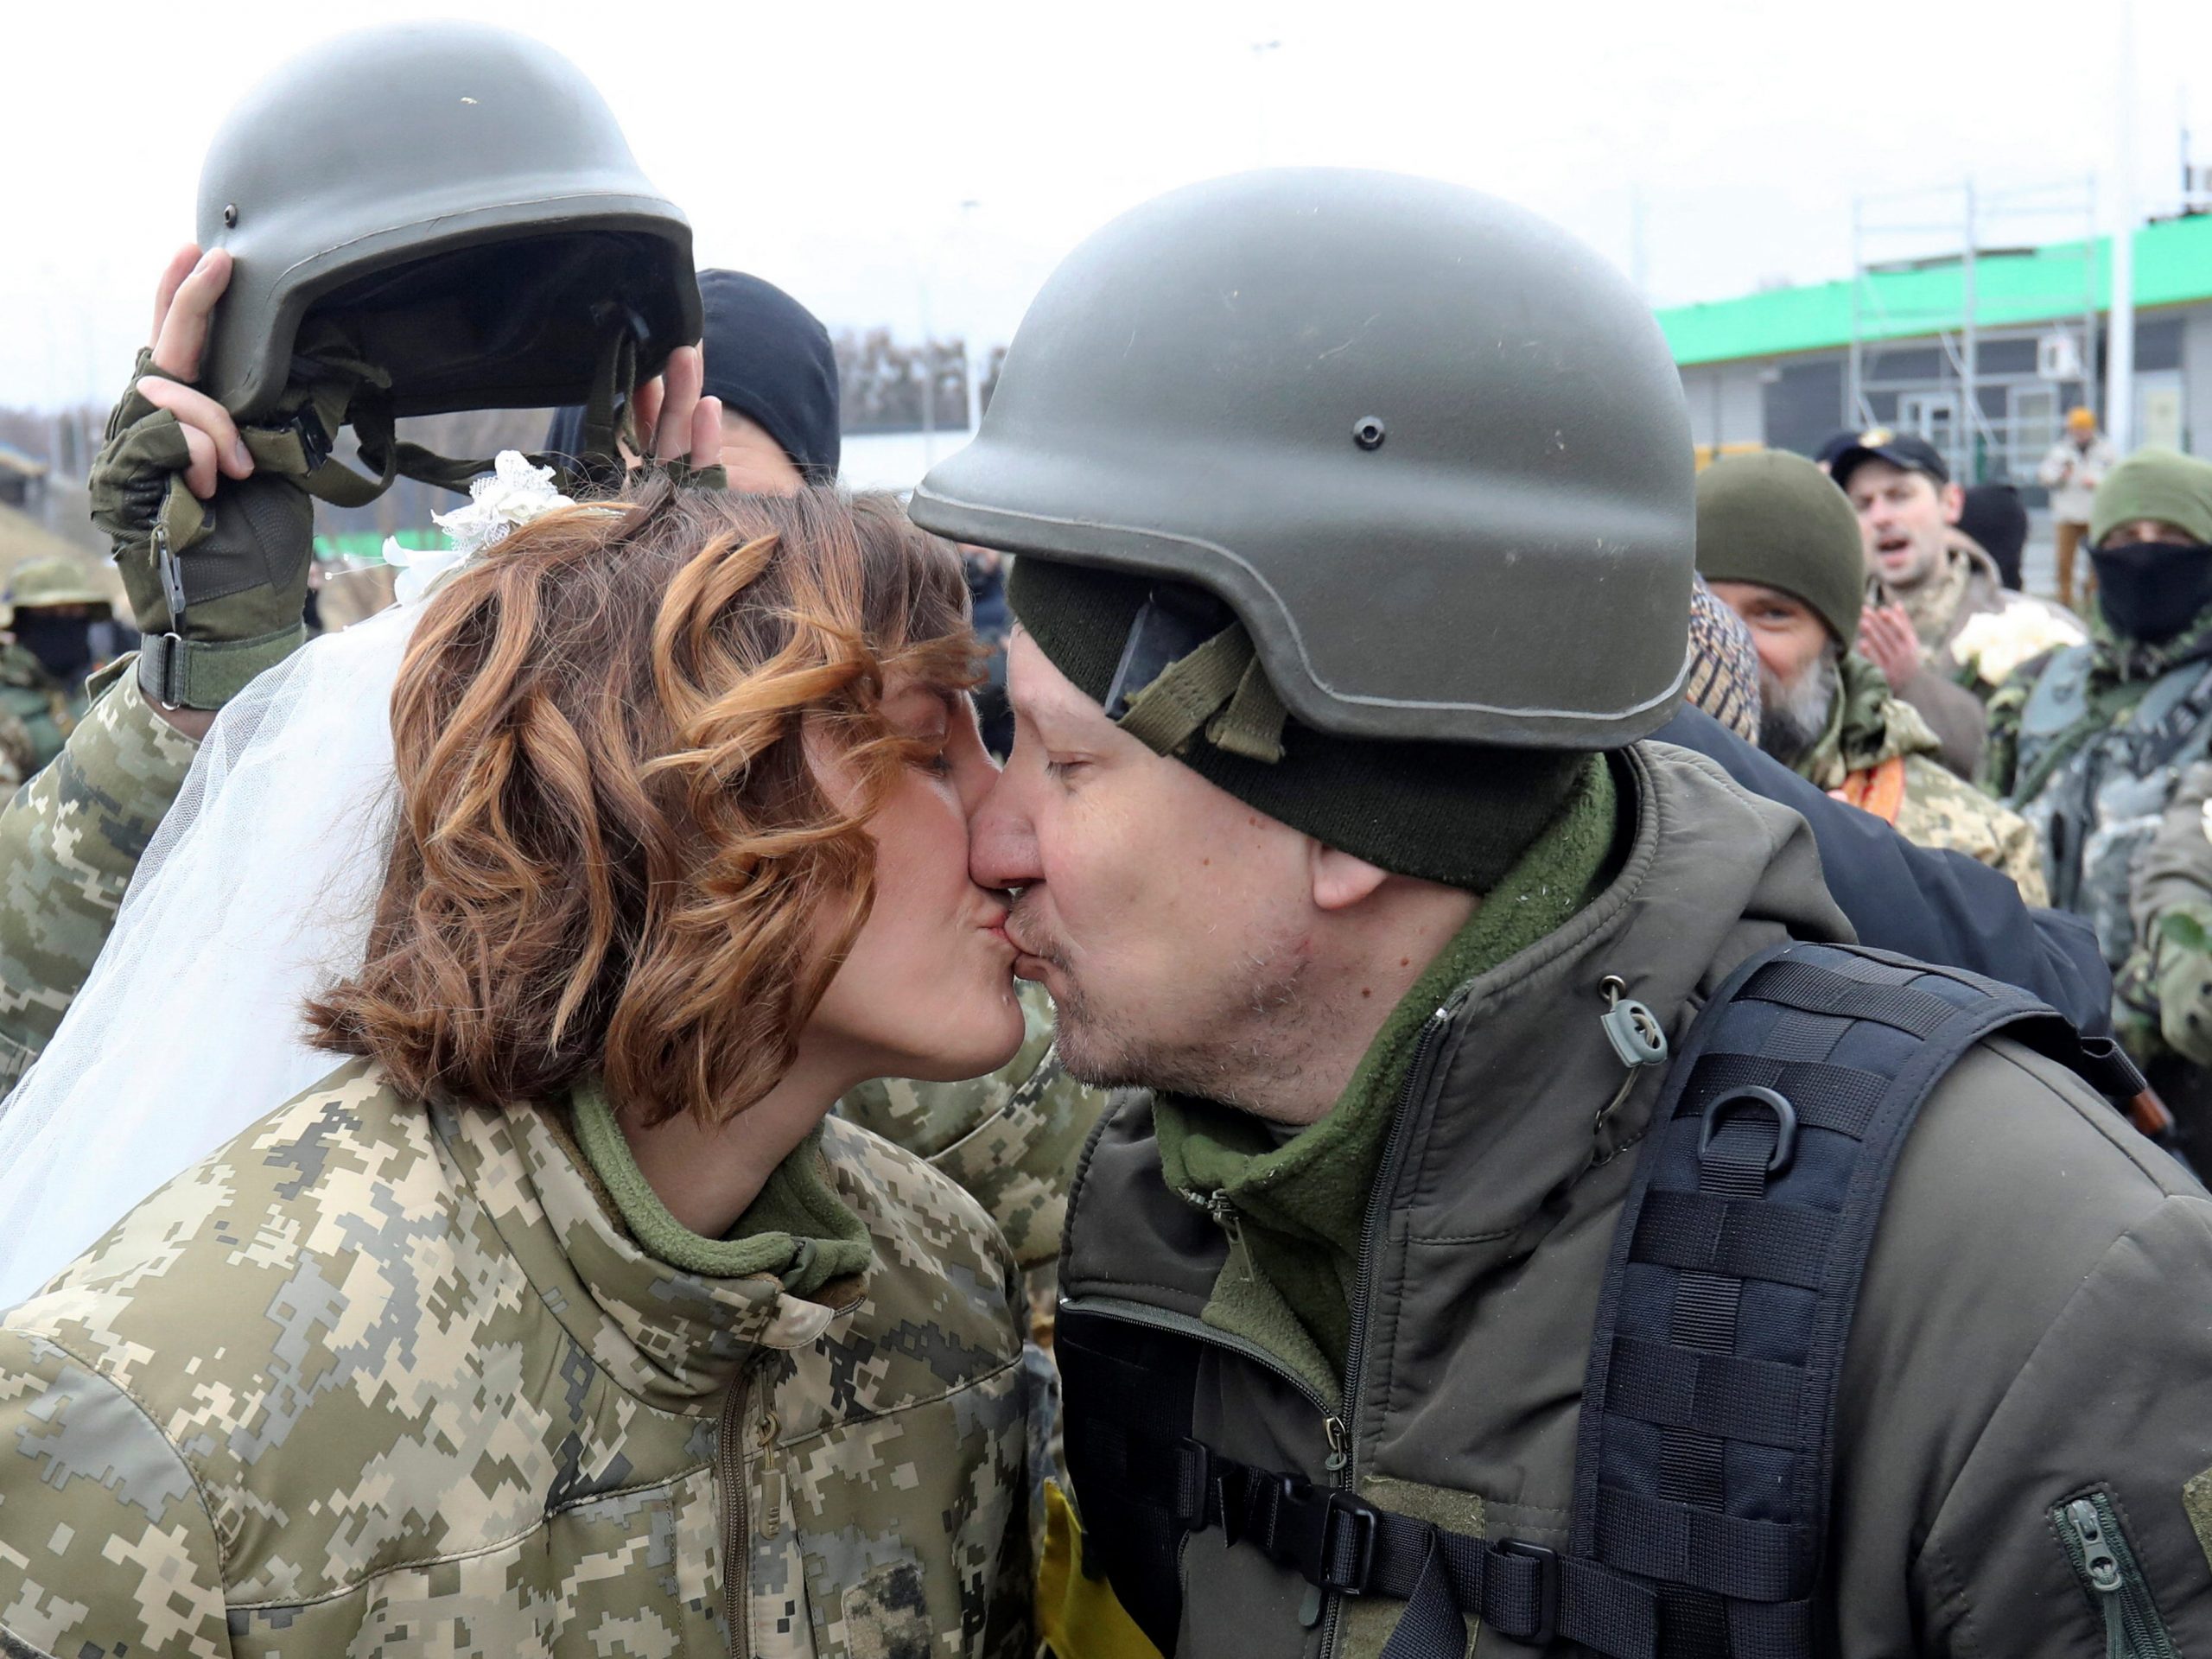 Members of the Ukrainian Territorial Defence Forces got married in Kyiv on Sunday.